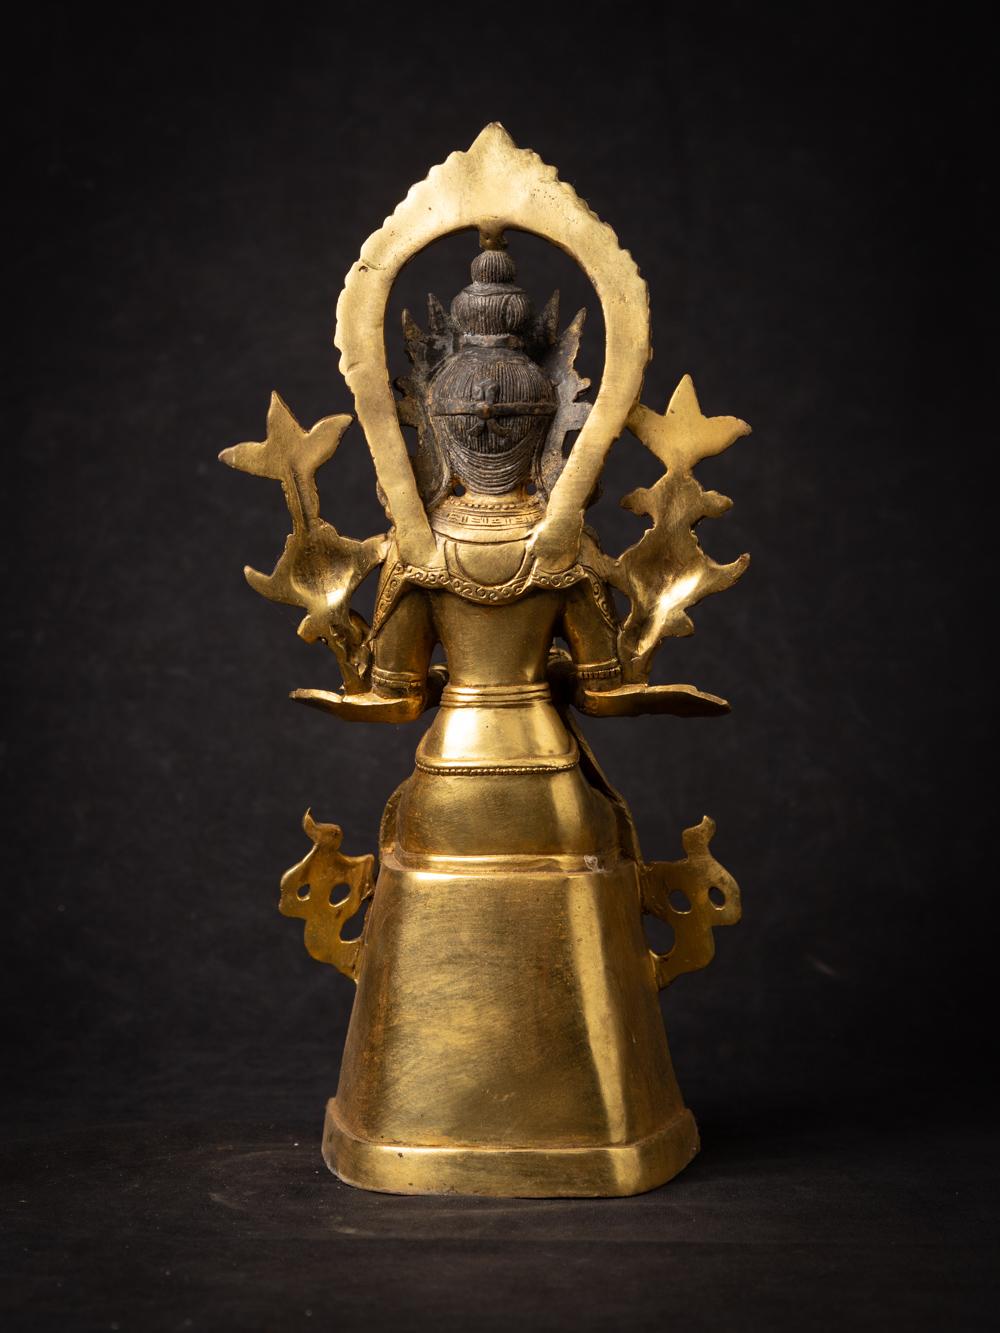 Experience the divine presence of a Bronze Nepali Maitreya Buddha statue, crafted with reverence and devotion. This exquisite piece, made from bronze, stands at 31.5 cm in height, with dimensions of 14.8 cm in width and 13.5 cm in depth. Its